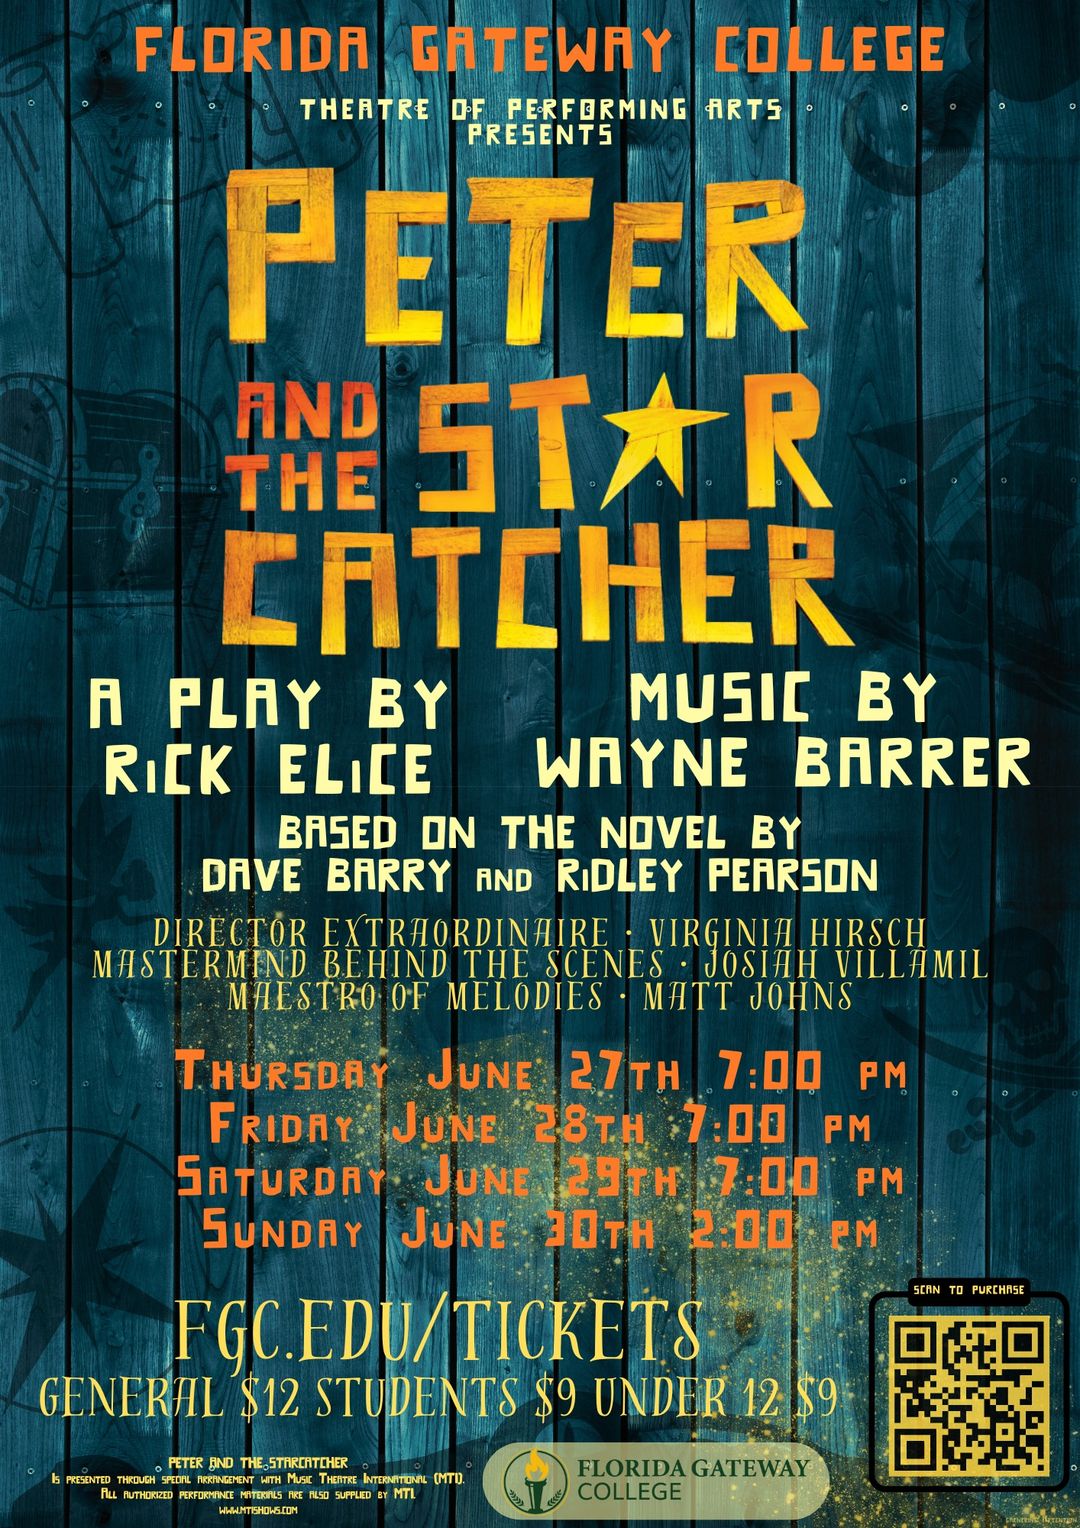 FGC Performing Arts to Present “Peter and the Starcatcher”